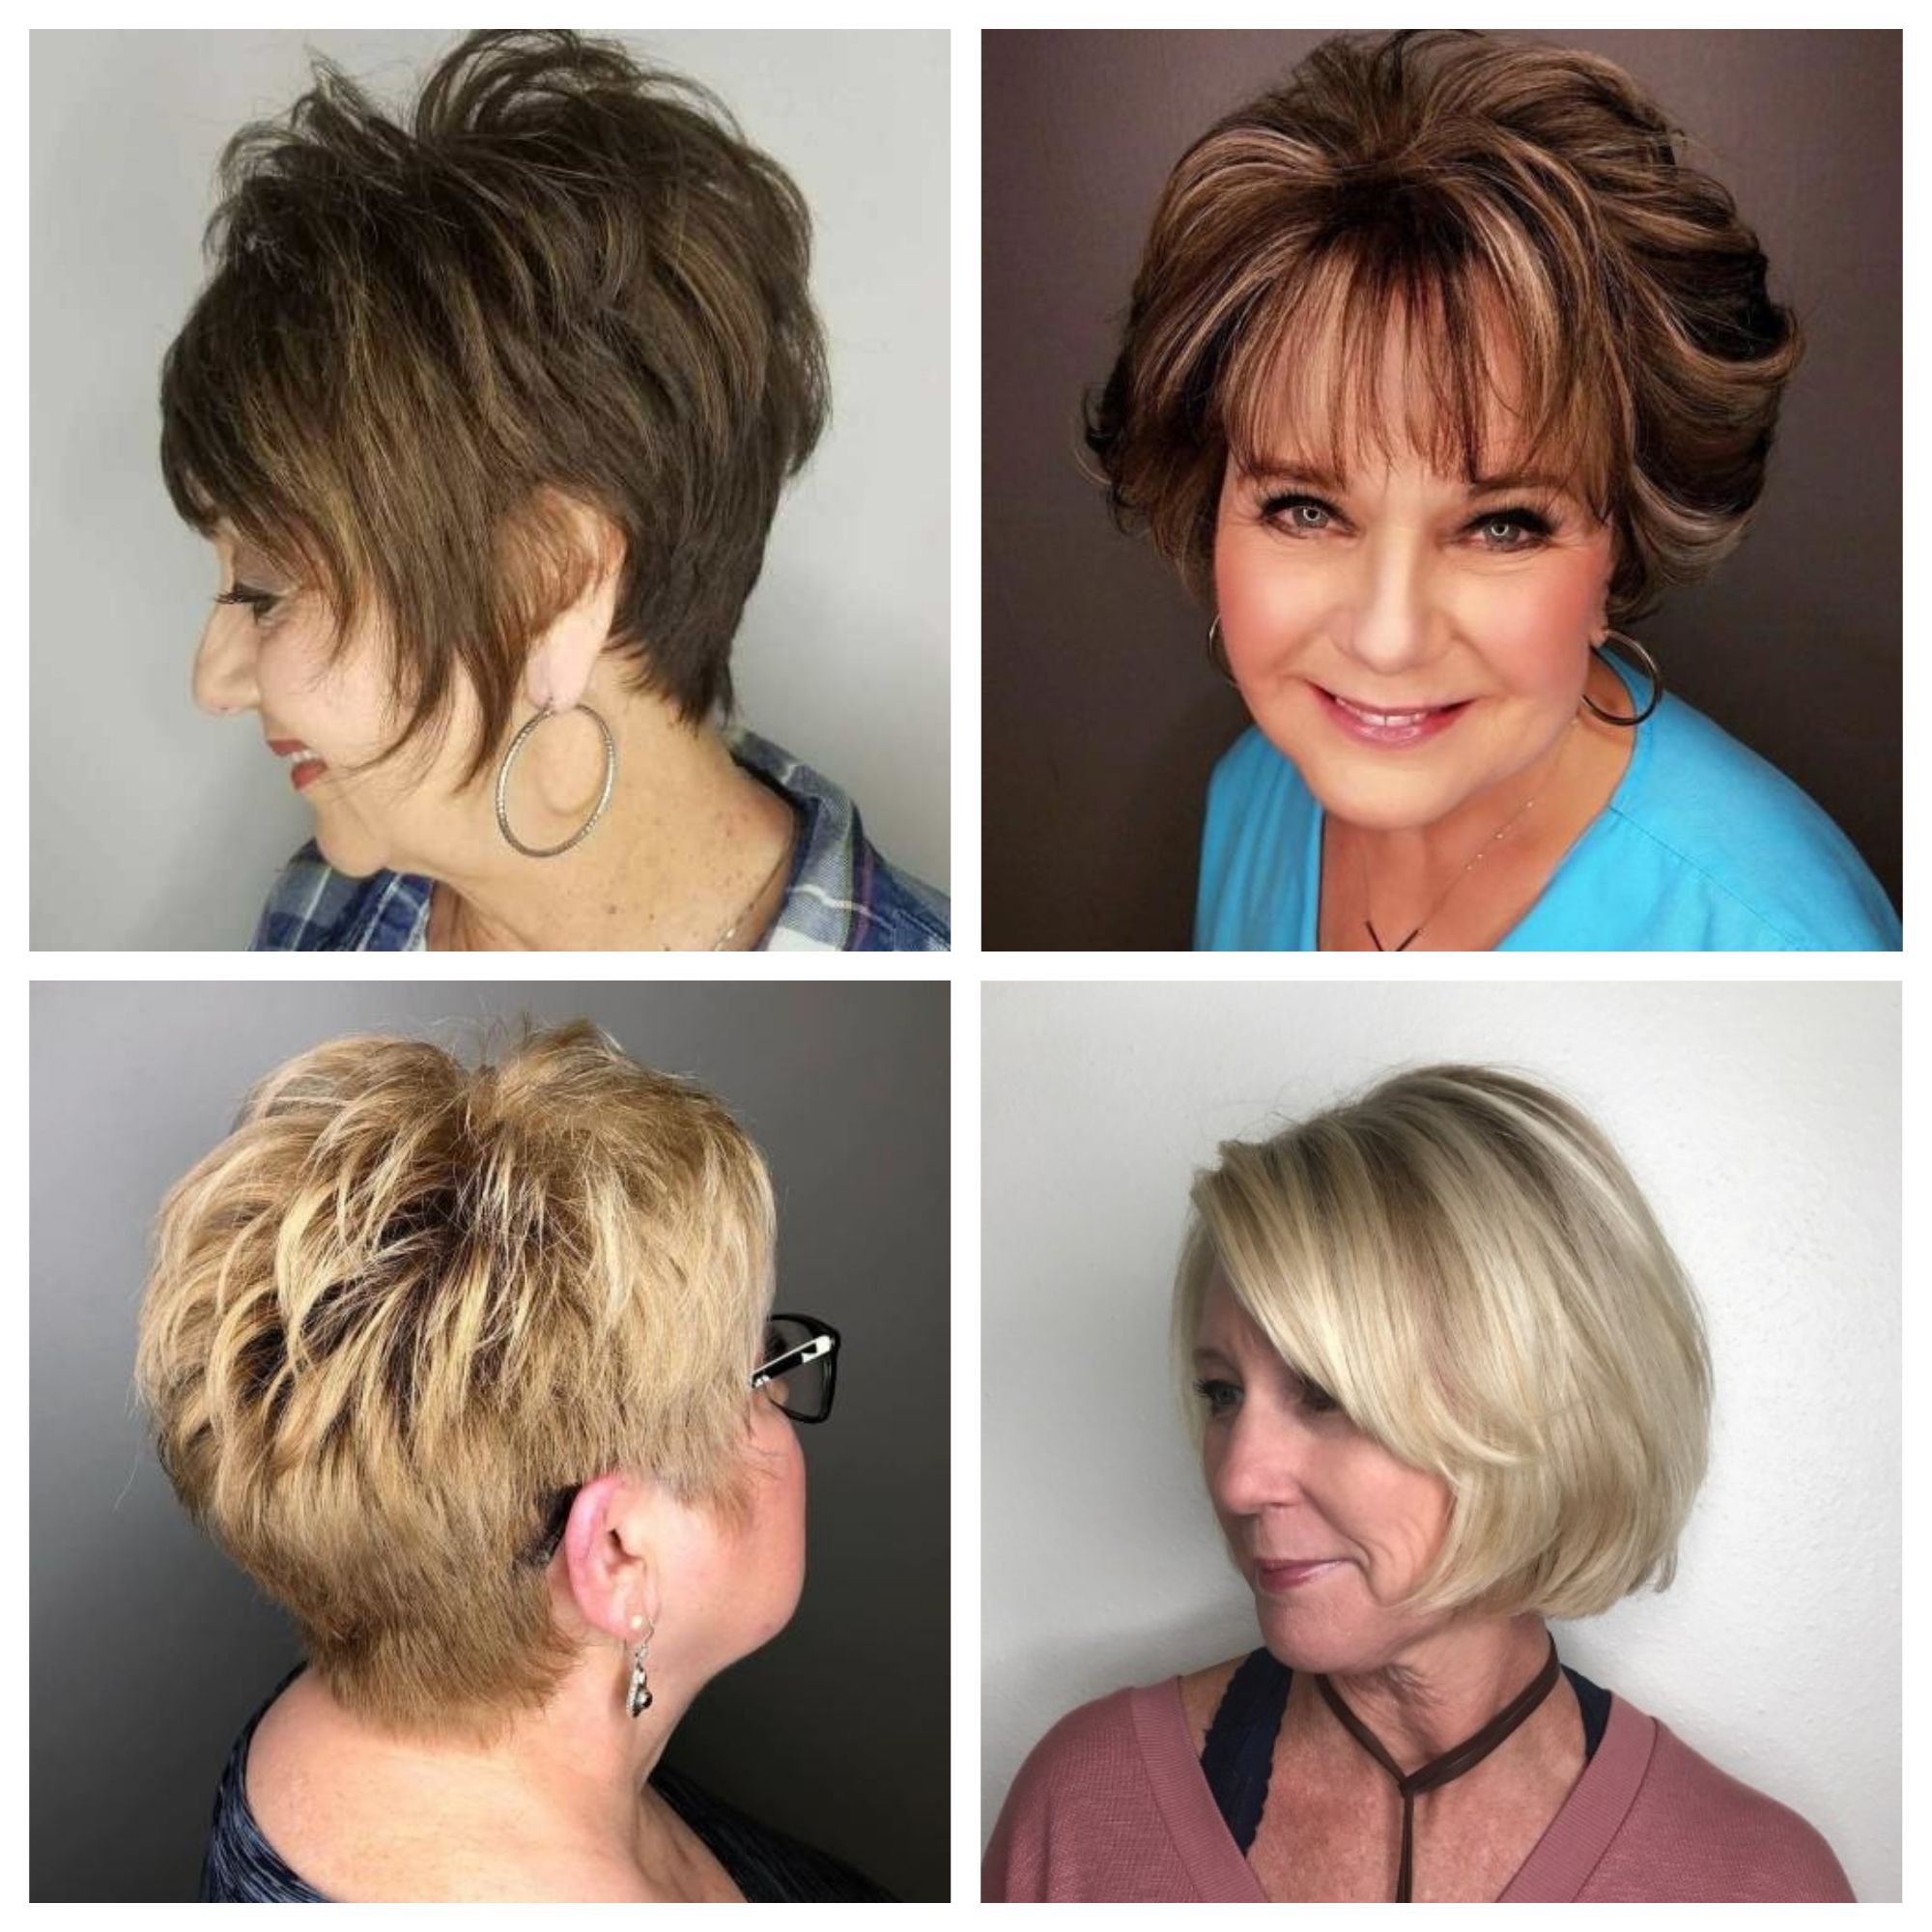 Short Hairstyles For Women Over 60 | 2019 Haircuts, Hairstyles And With Face Framing Short Hairstyles (View 16 of 25)